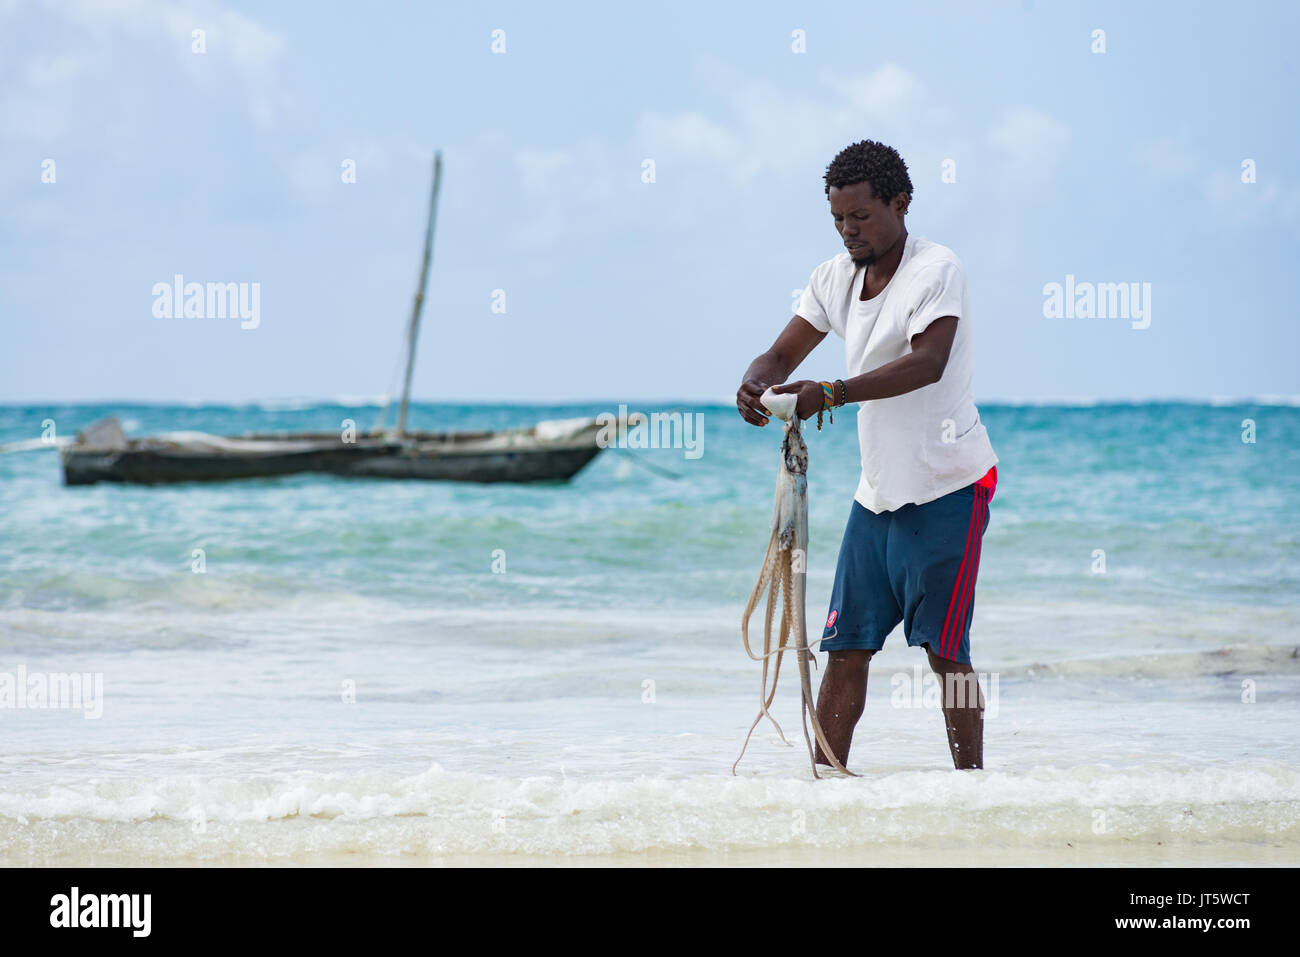 Fisherman washes caught octopus in sea water by shoreline beach, Diani, Kenya Stock Photo